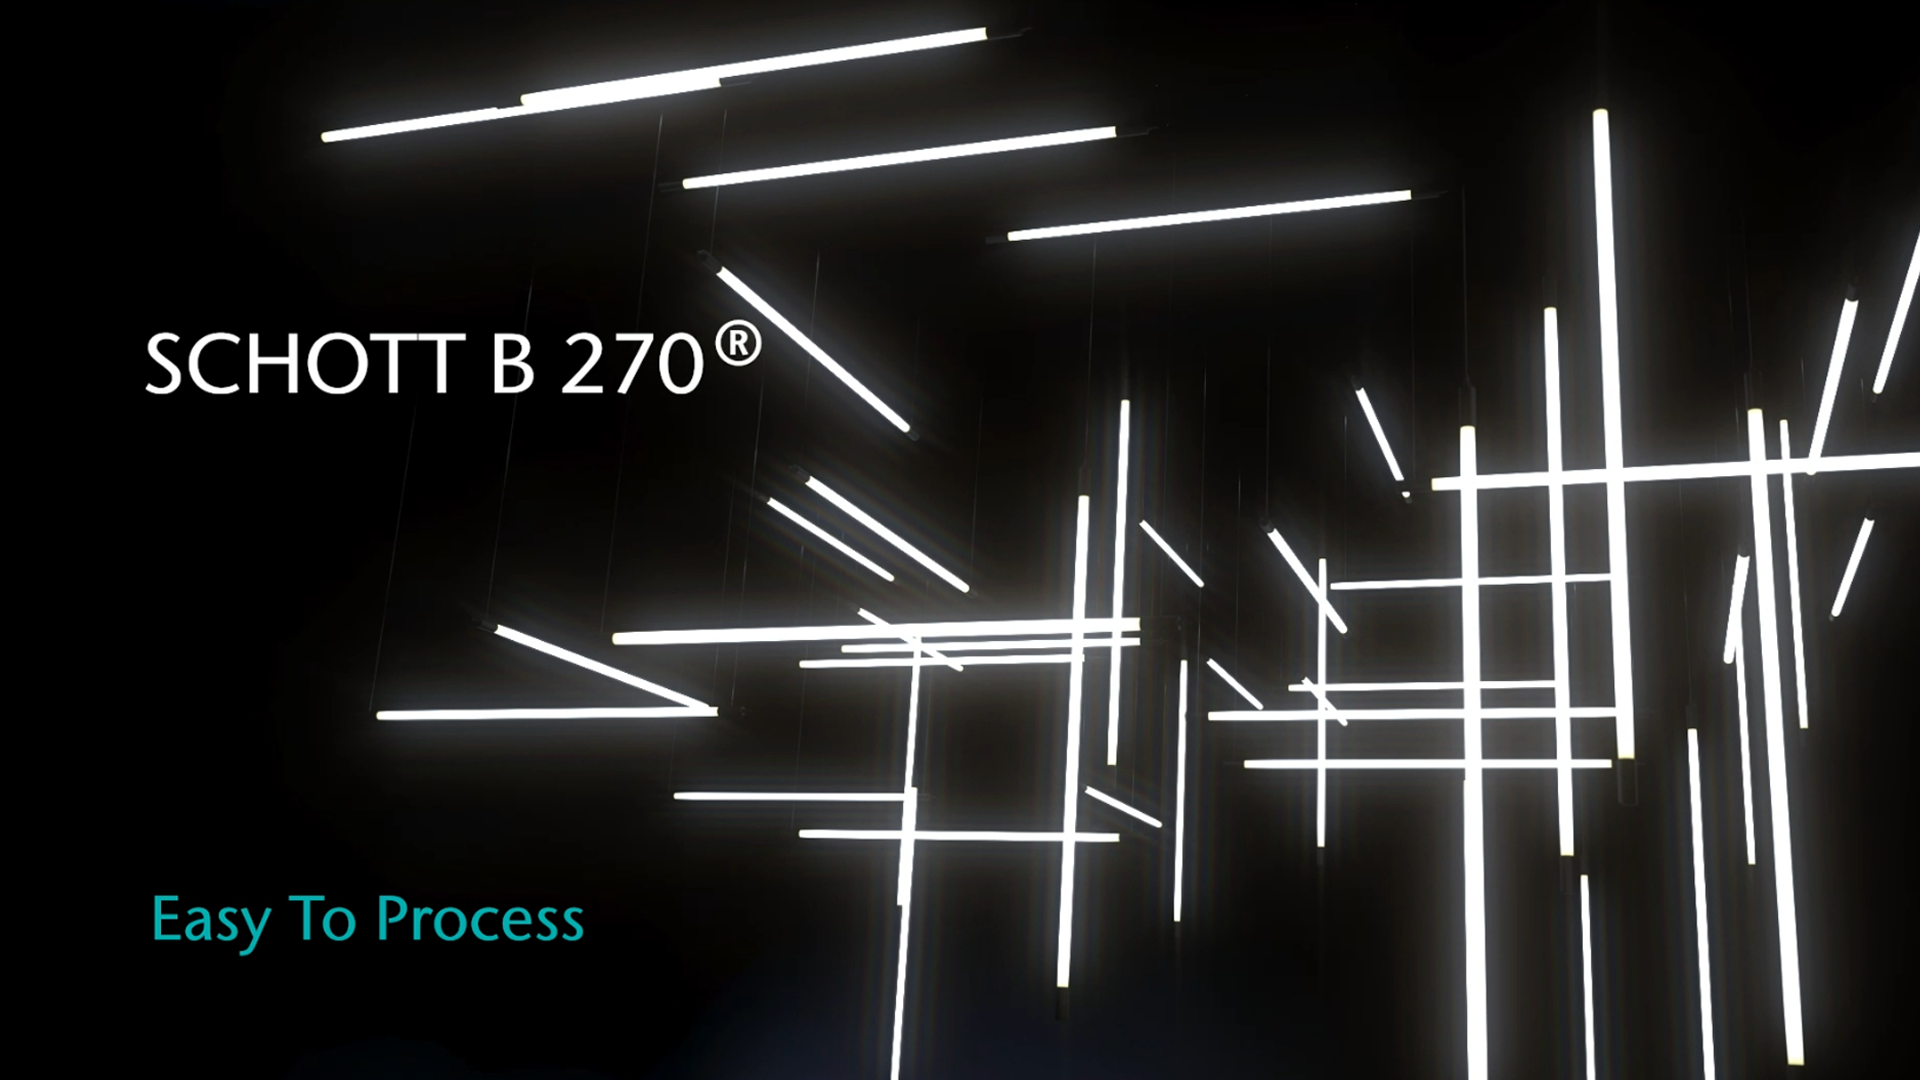 A lot of white fluorescent tubes floating on different levels at right angles to each other in a dark room. In front of it is a hovering text: “SCHOTT B 270® - Easy to process.